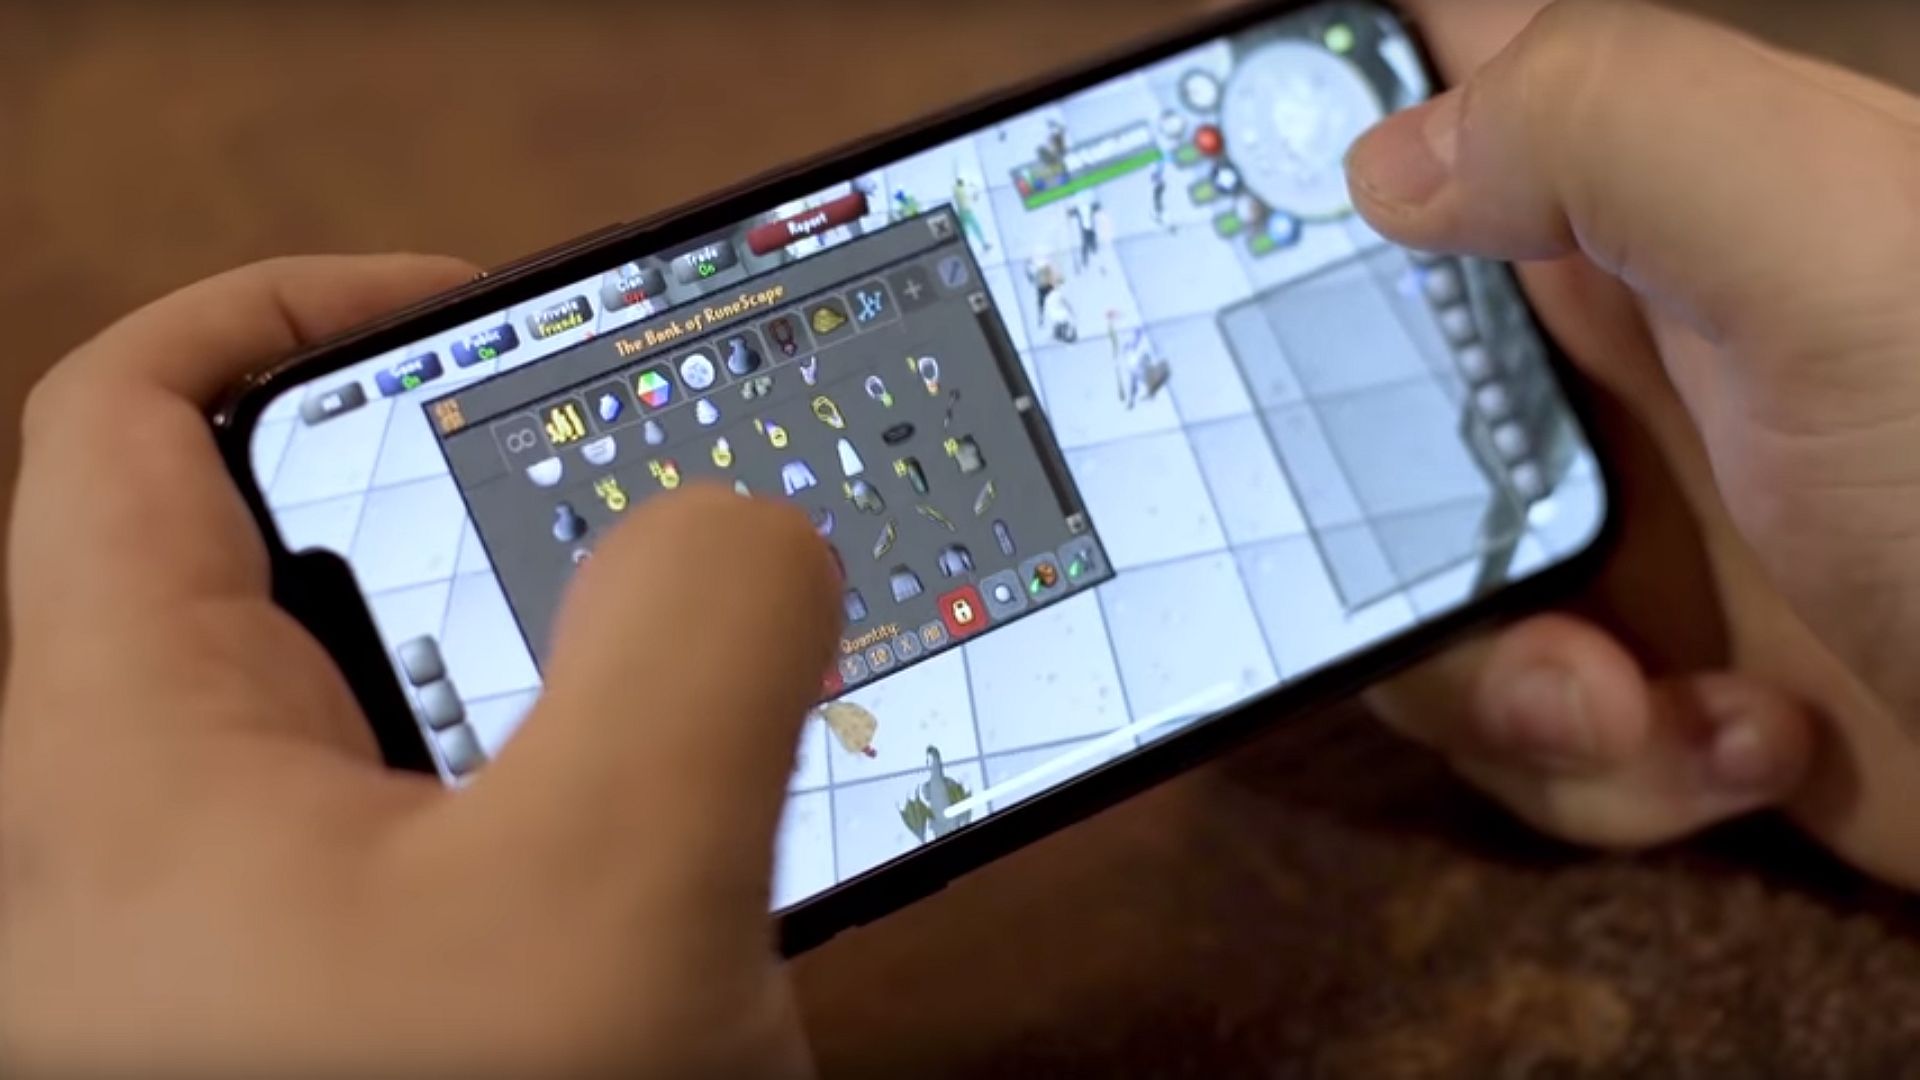 Old School RuneScape Mobile Release Date Announced, Features Cross-Platform  Play - GameRevolution